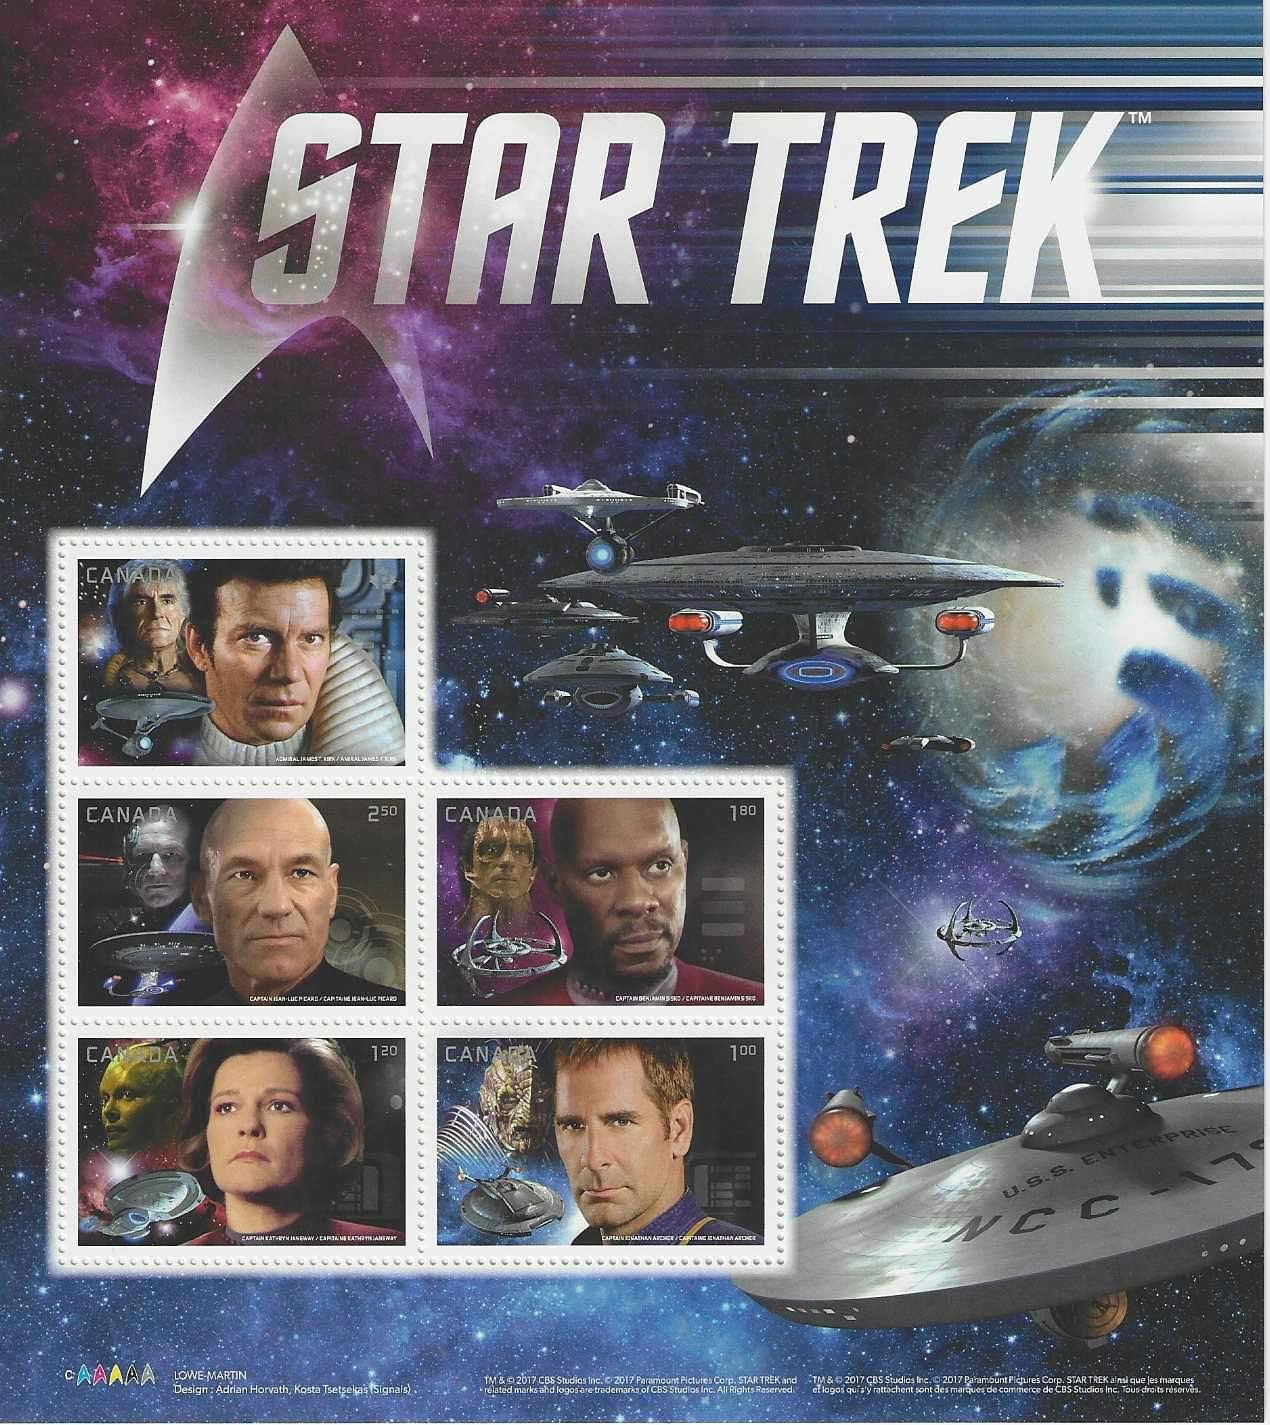 Star Trek stamps from Canada